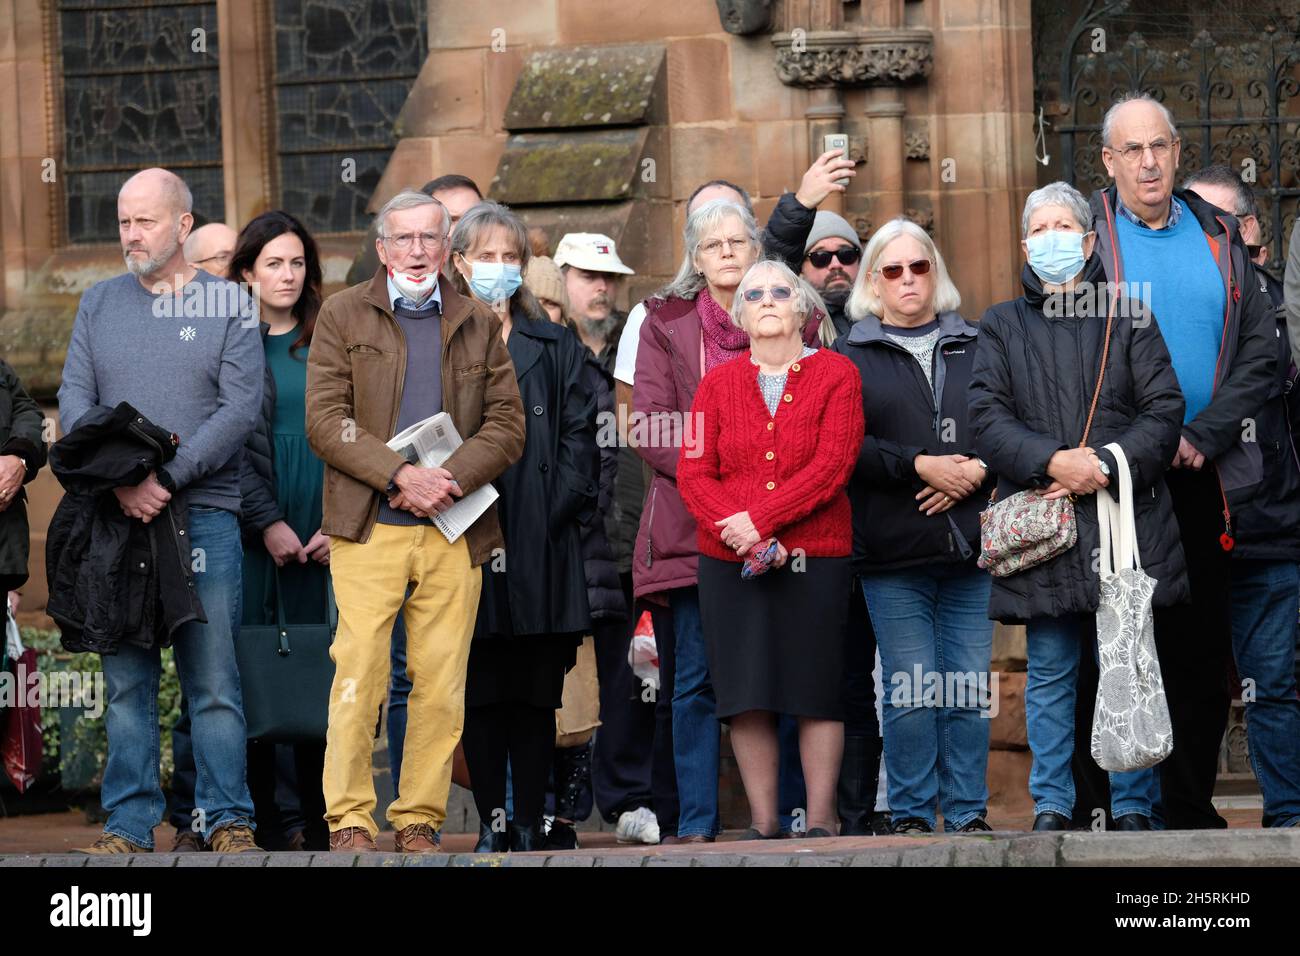 Hereford, Herefordshire, UK - Thursday 11th November 2021 - Members of the public and veterans gather at the Remembrance Day service in Hereford - Photo Steven May / Alamy Live News Stock Photo